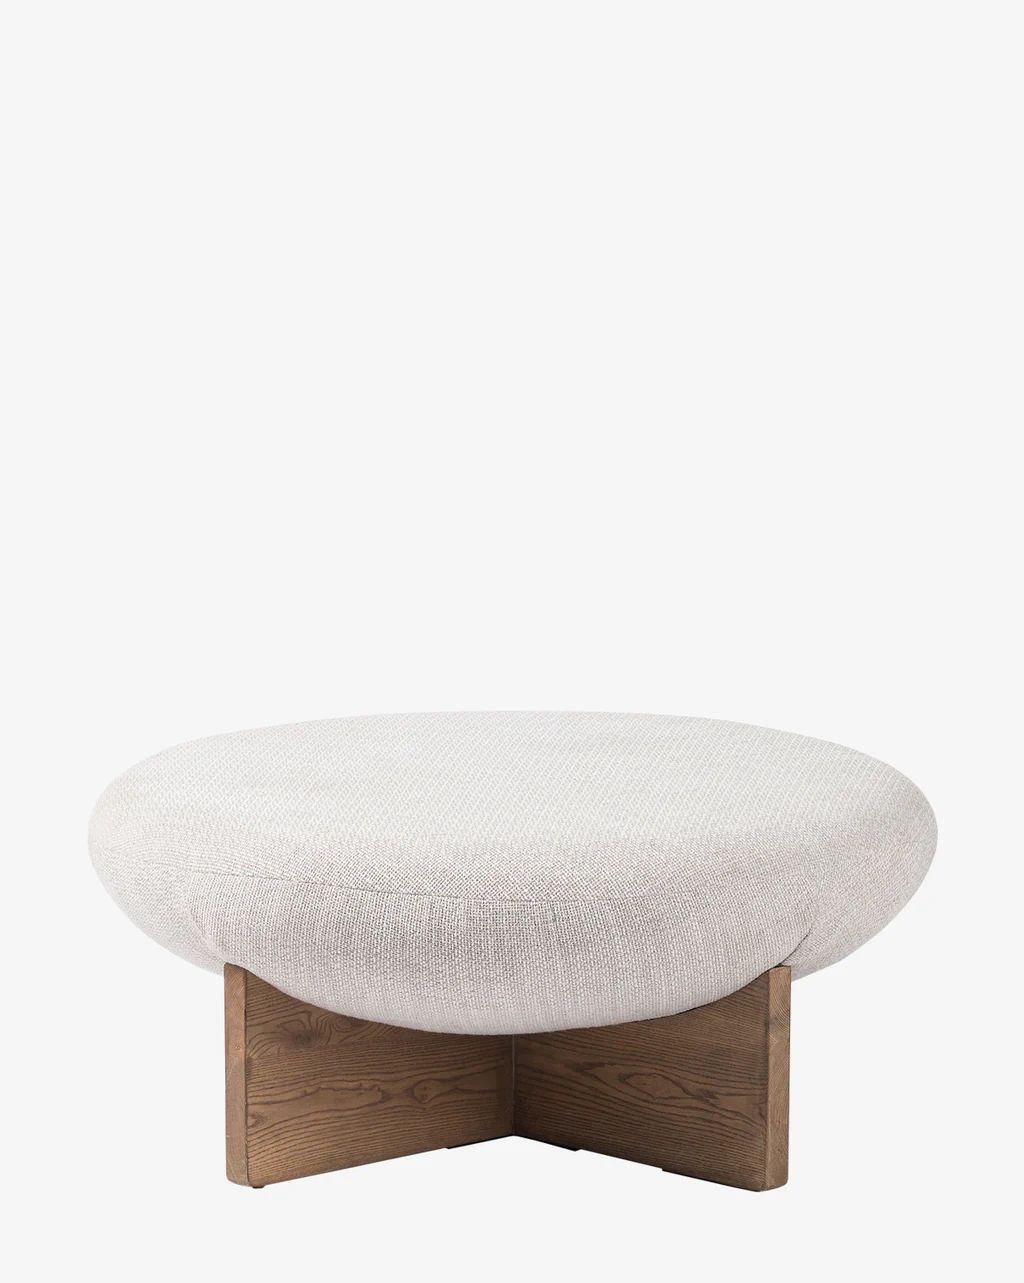 Wesson Ottoman | McGee & Co.